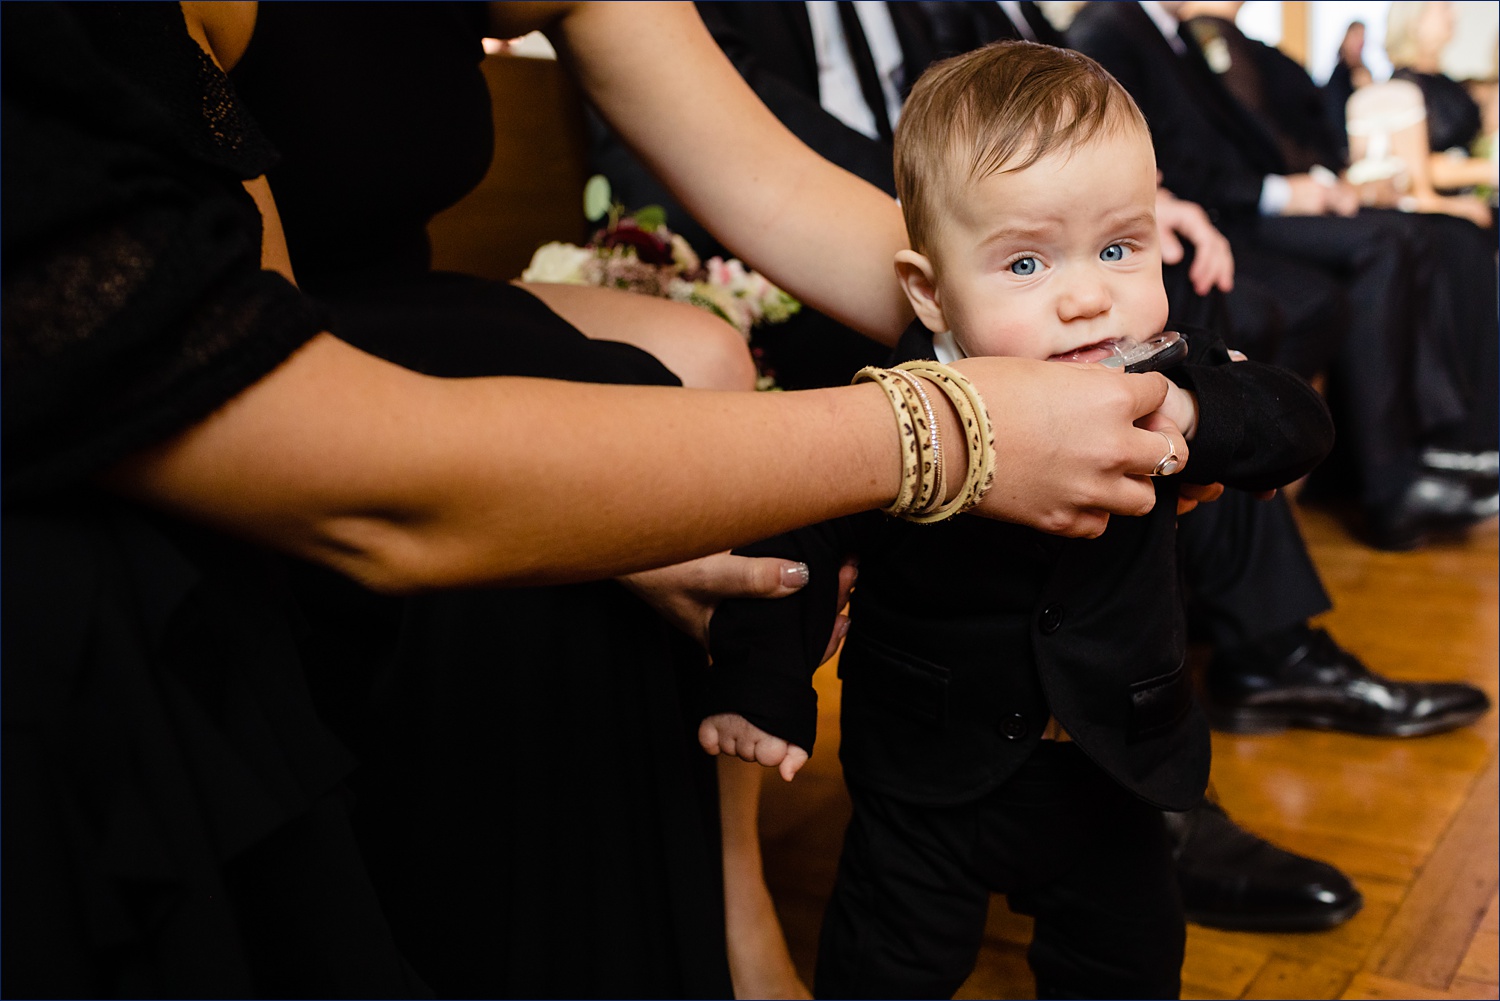 Ring bearer baby at the wedding ceremony